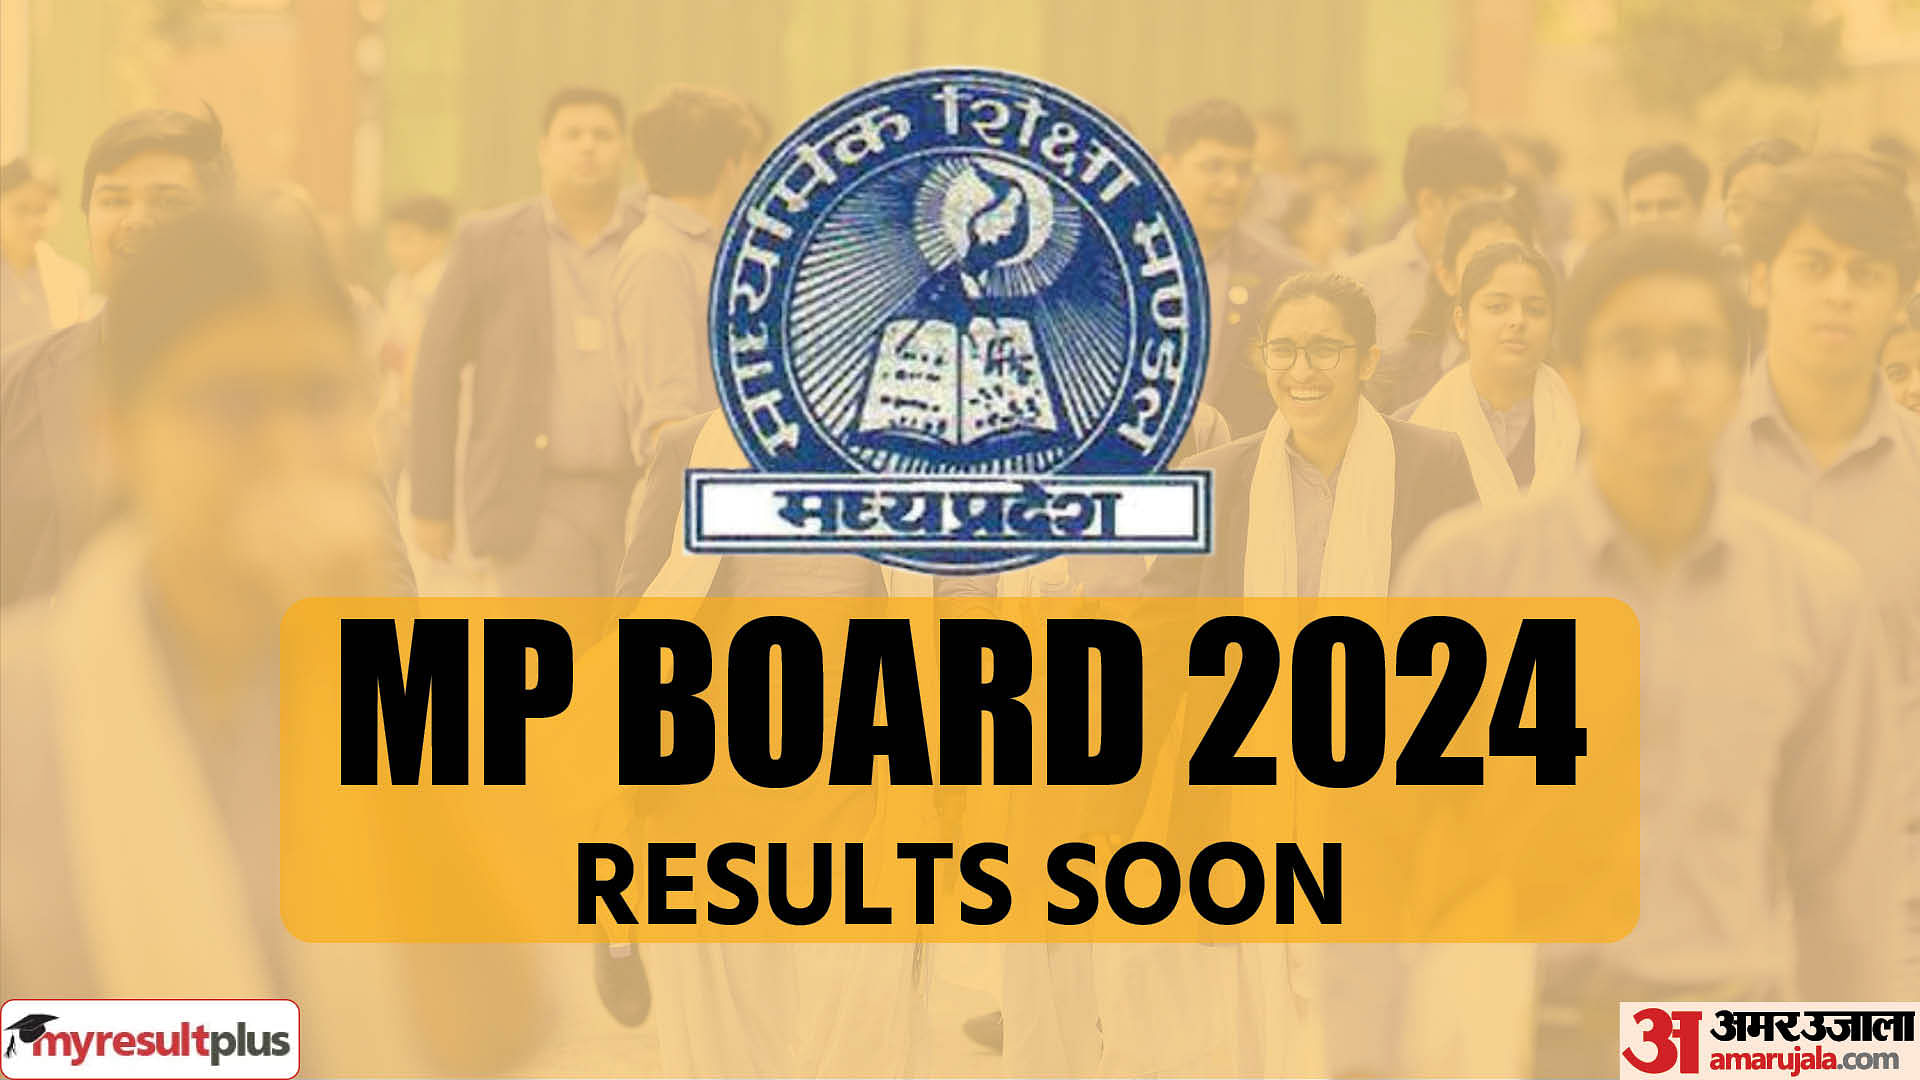 MP Board 5th, 8th Result 2024 releasing today at 11:30, Check your results here once released